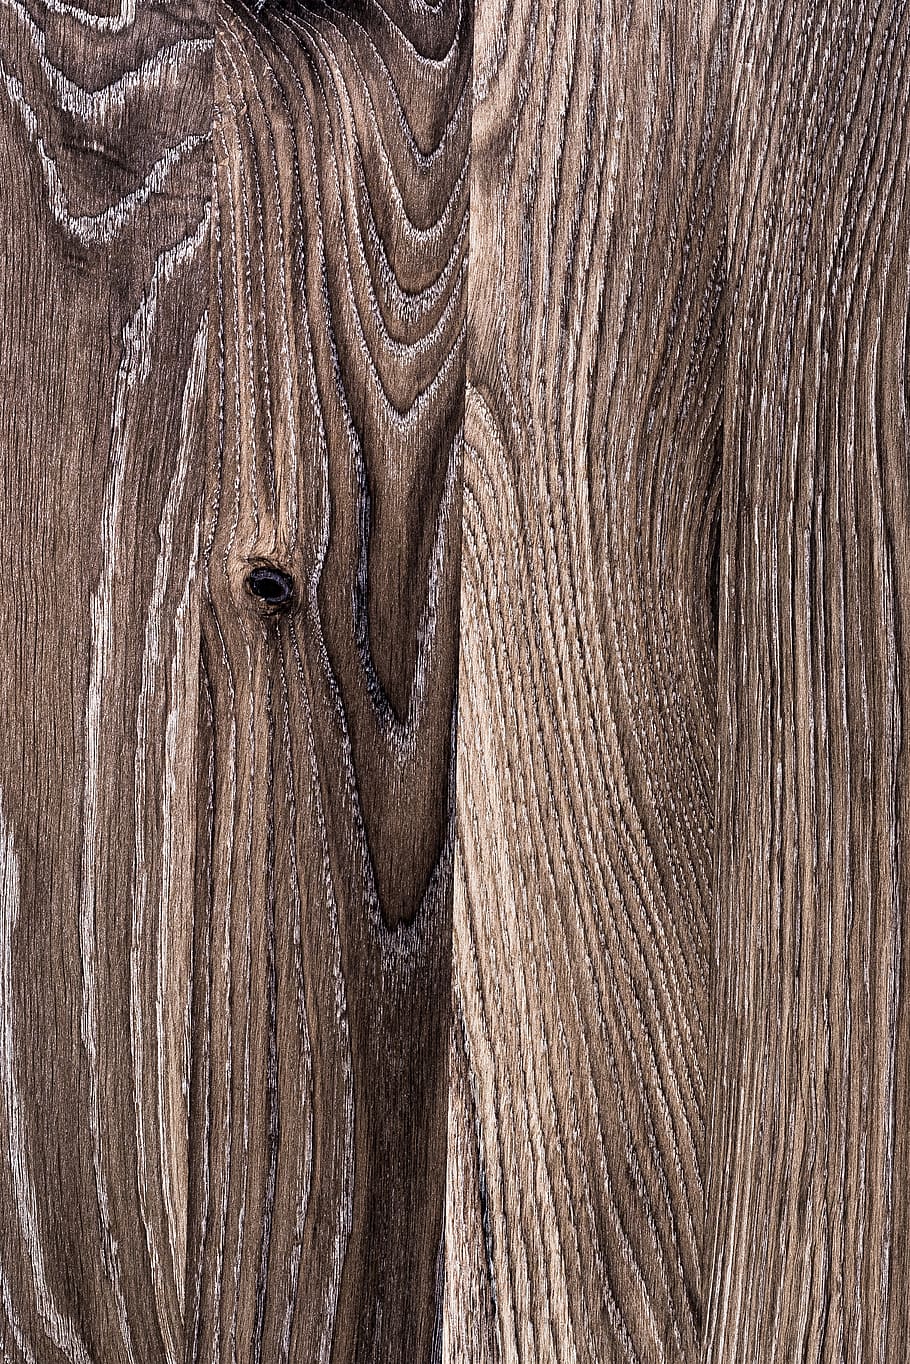 wood, pattern, texture, structure, brown, wooden, grain, tree